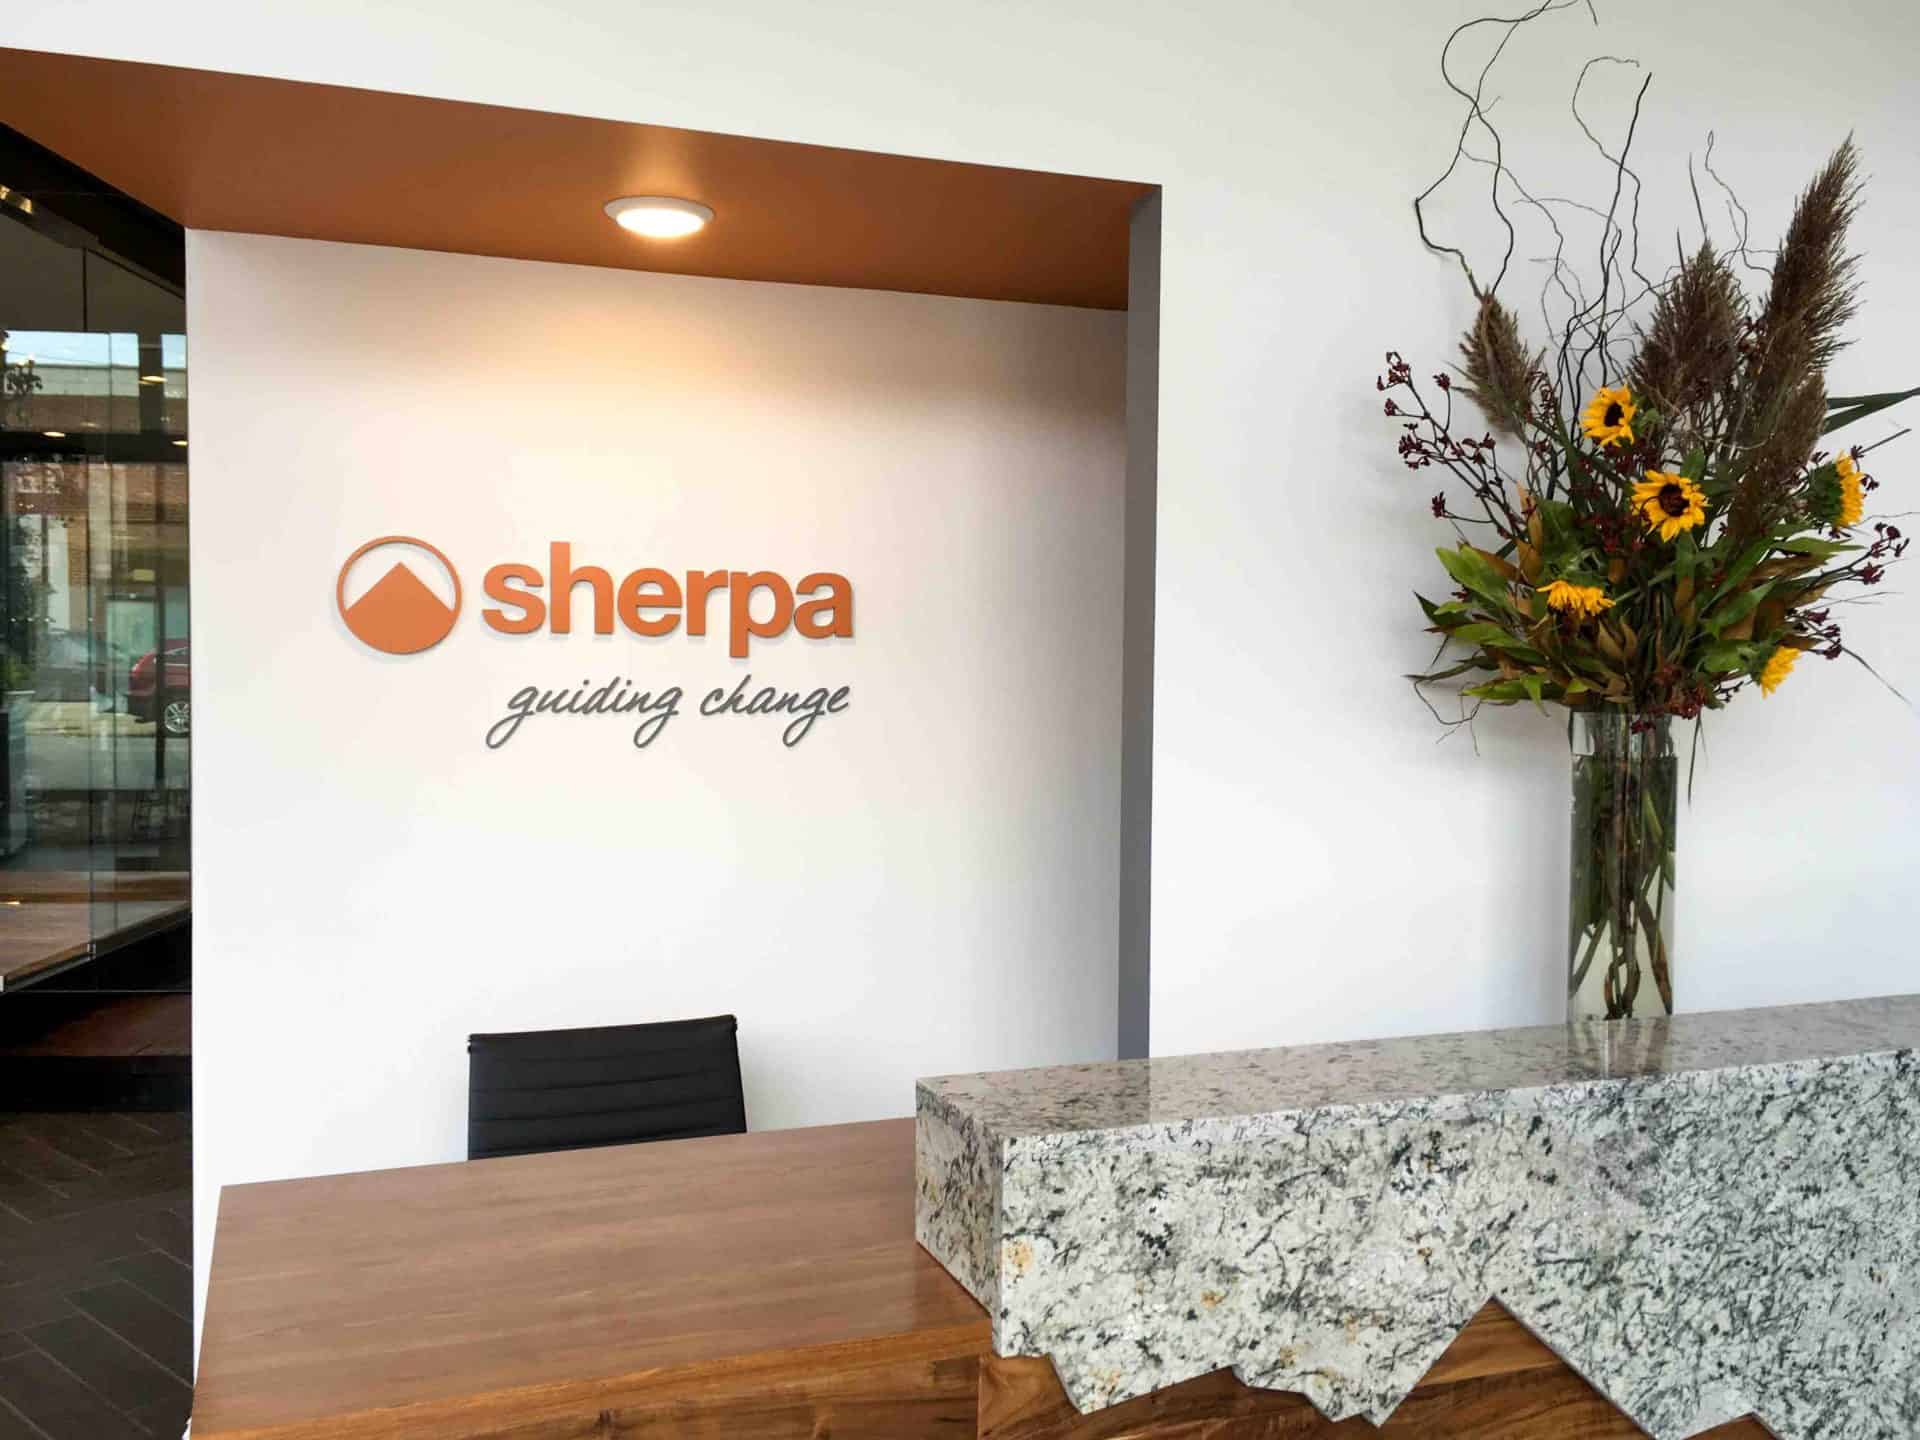 Dimensional logo wall in orange and black for Sherpa